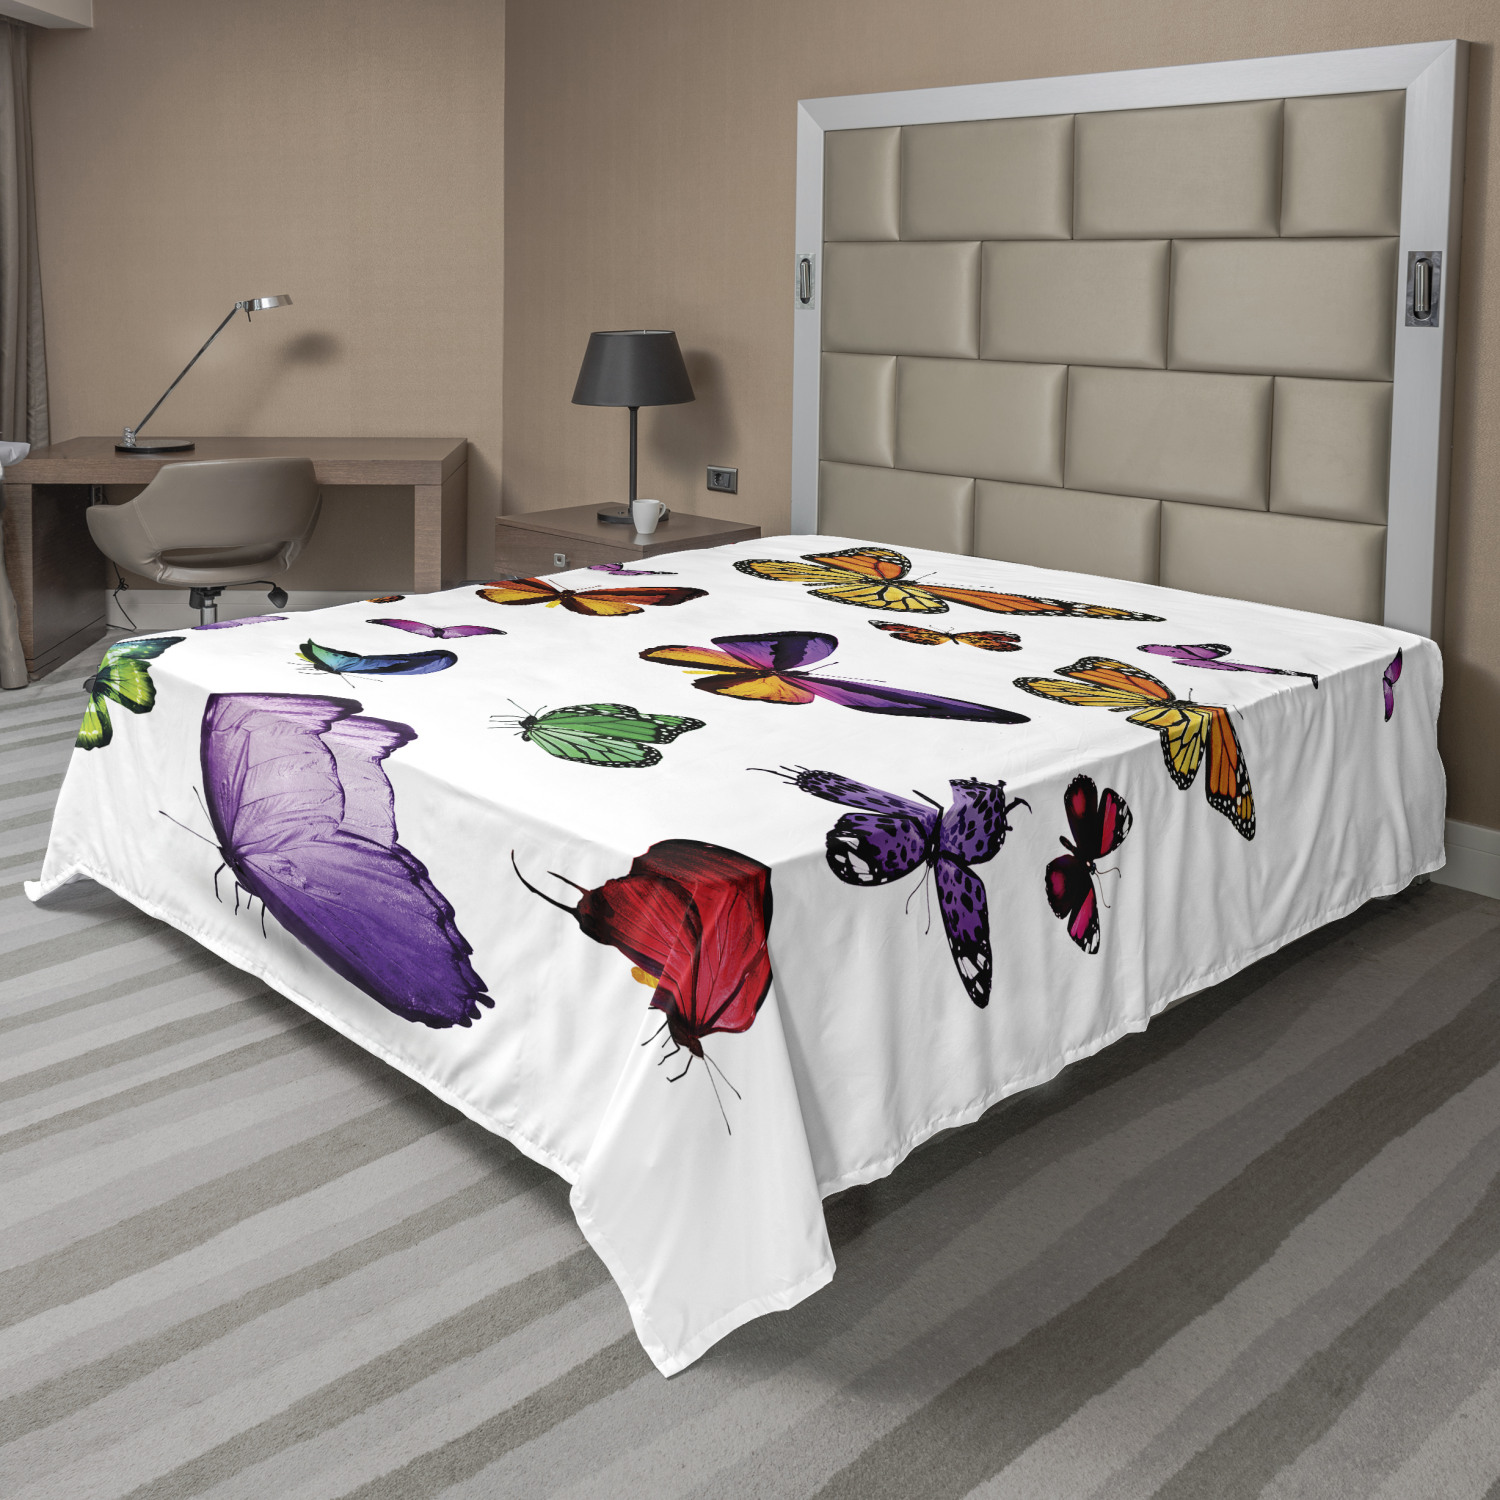 Details about   Ambesonne Colorful Artwork Flat Sheet Top Sheet Decorative Bedding 6 Sizes 